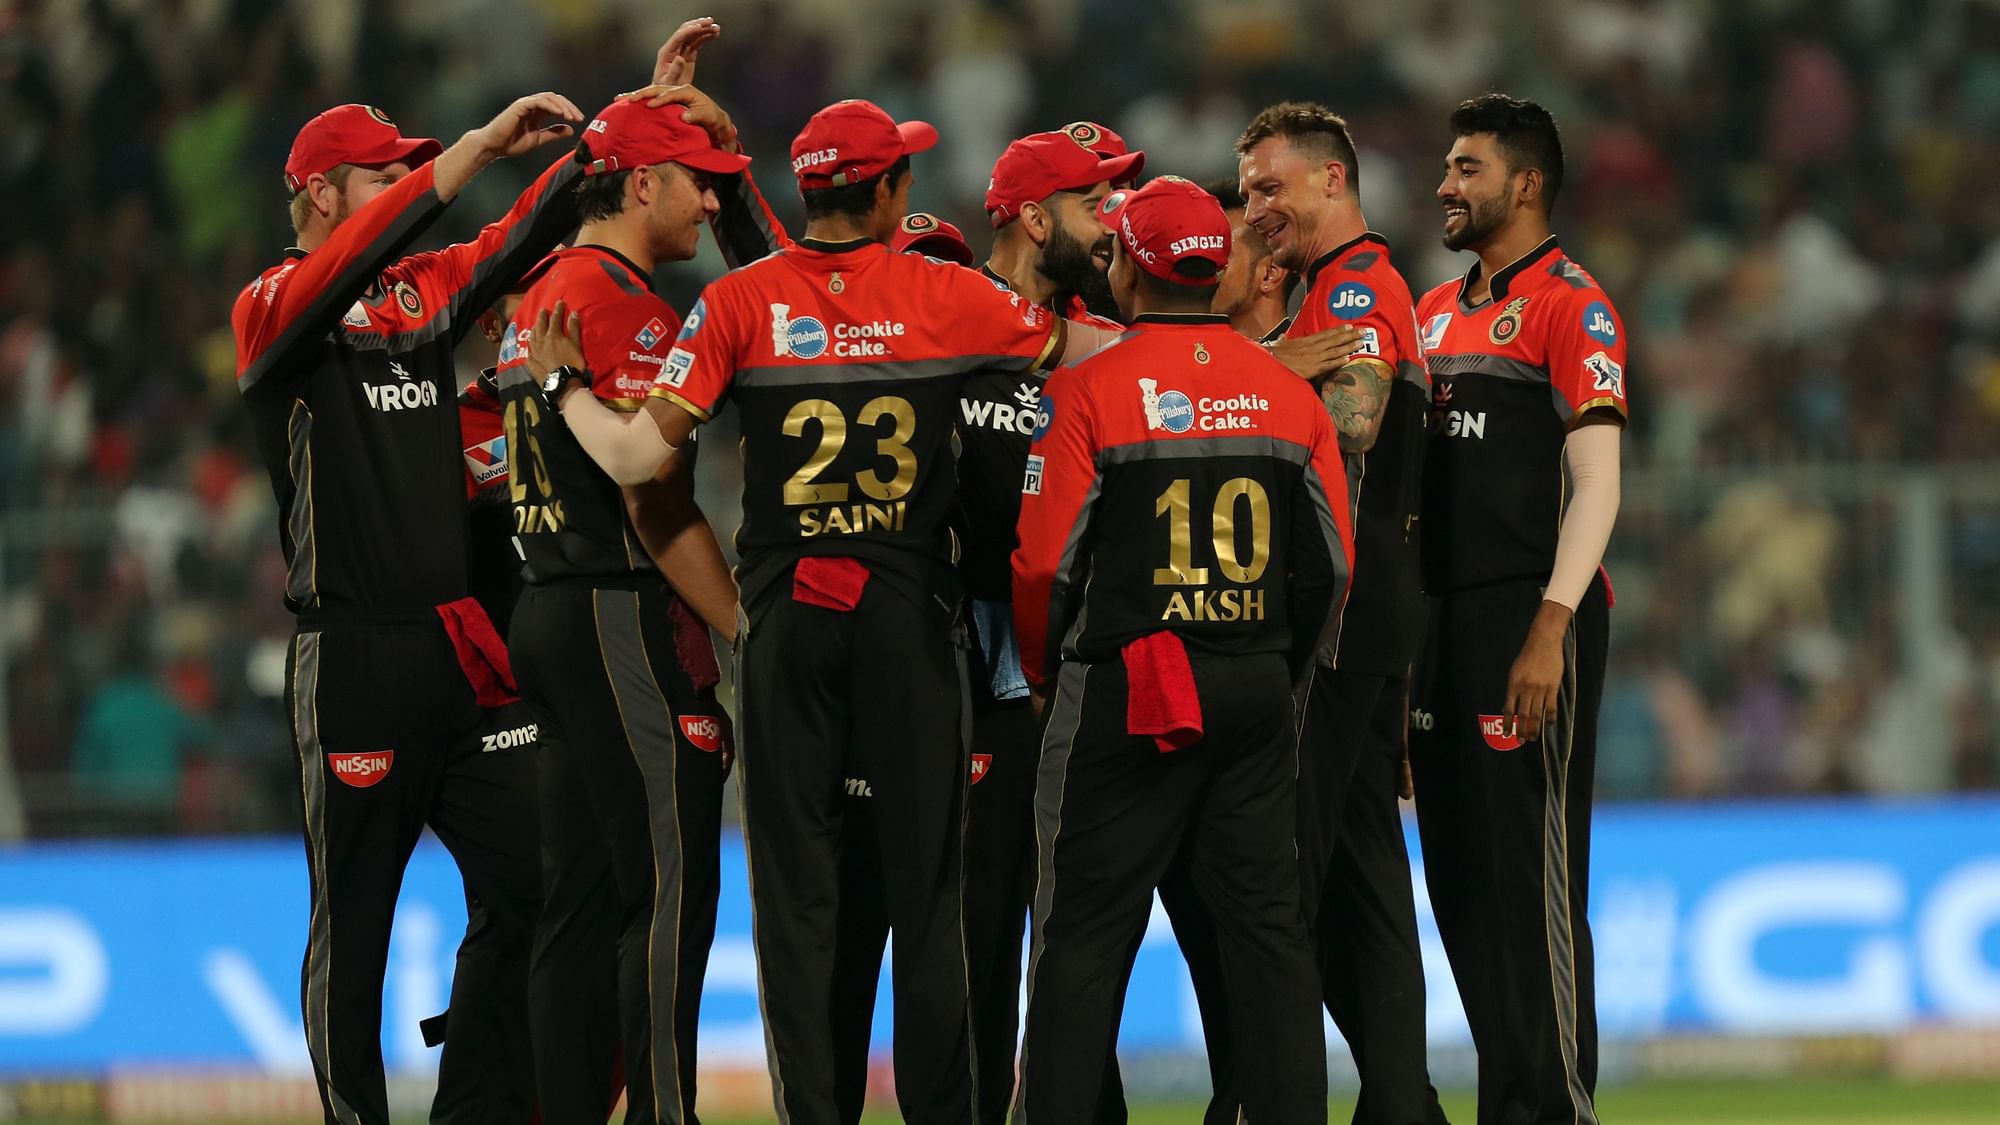 With this win, RCB register their second win of the tournament while KKR lose their fourth match in a row in IPL 2019.